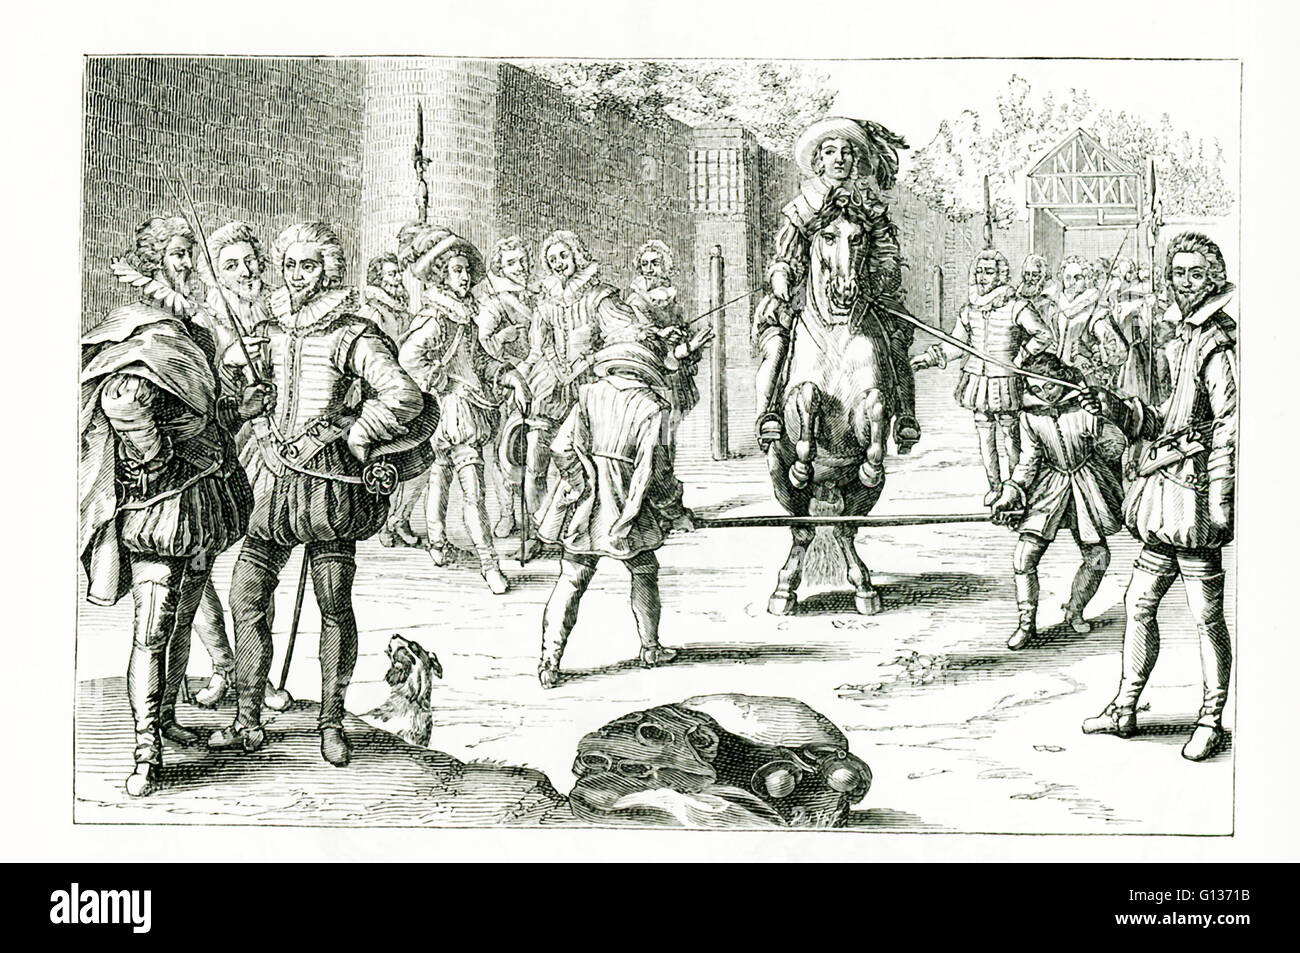 The caption for this engraving is: Louis XIII at the armory. The work was titled: Royal armory... fact and practical instruction by Antoine Pluvinel, his principal squire... all serious and represented engraved figures, by the Dutch publisher Crispian de Pas in 1624. N.B. The original print bears the names of various actors in this scene. The principal ones are: The king, the fifth character from left to right; Effiat, the premier; the count of Soissons, on horse; and Pluvinel standing to the right of the horse. Stock Photo